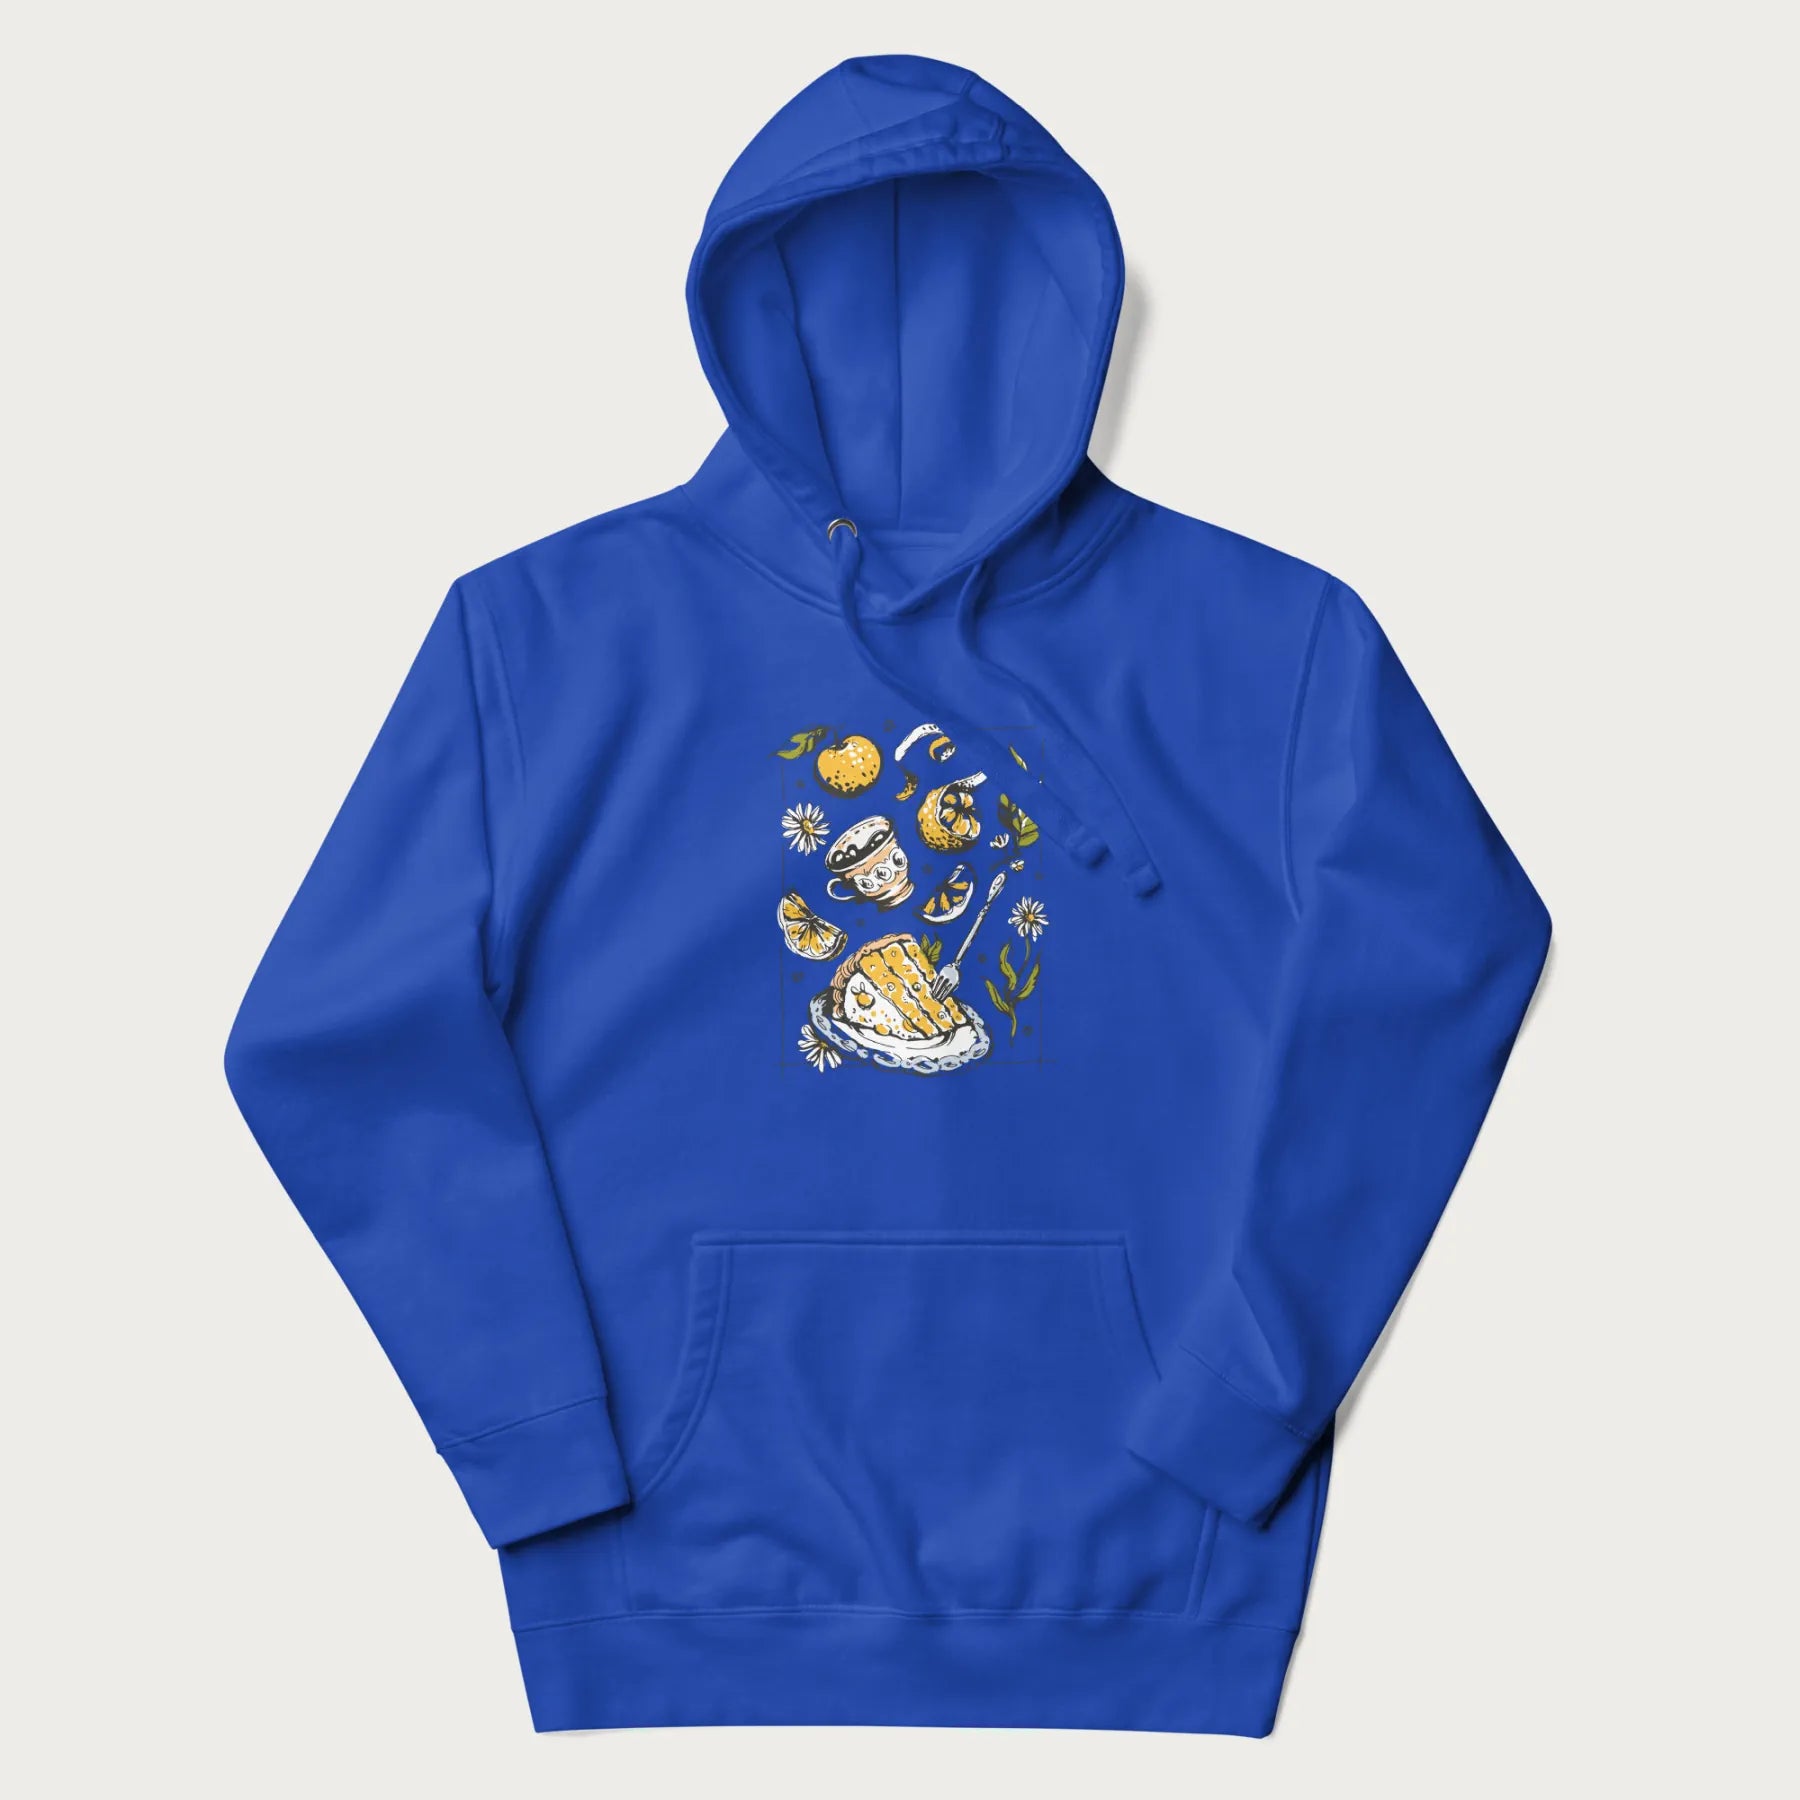 Royal blue hoodie featuring a Cottagecore-themed graphic with oranges, a floral porcelain cup, orange pie, and daisies.